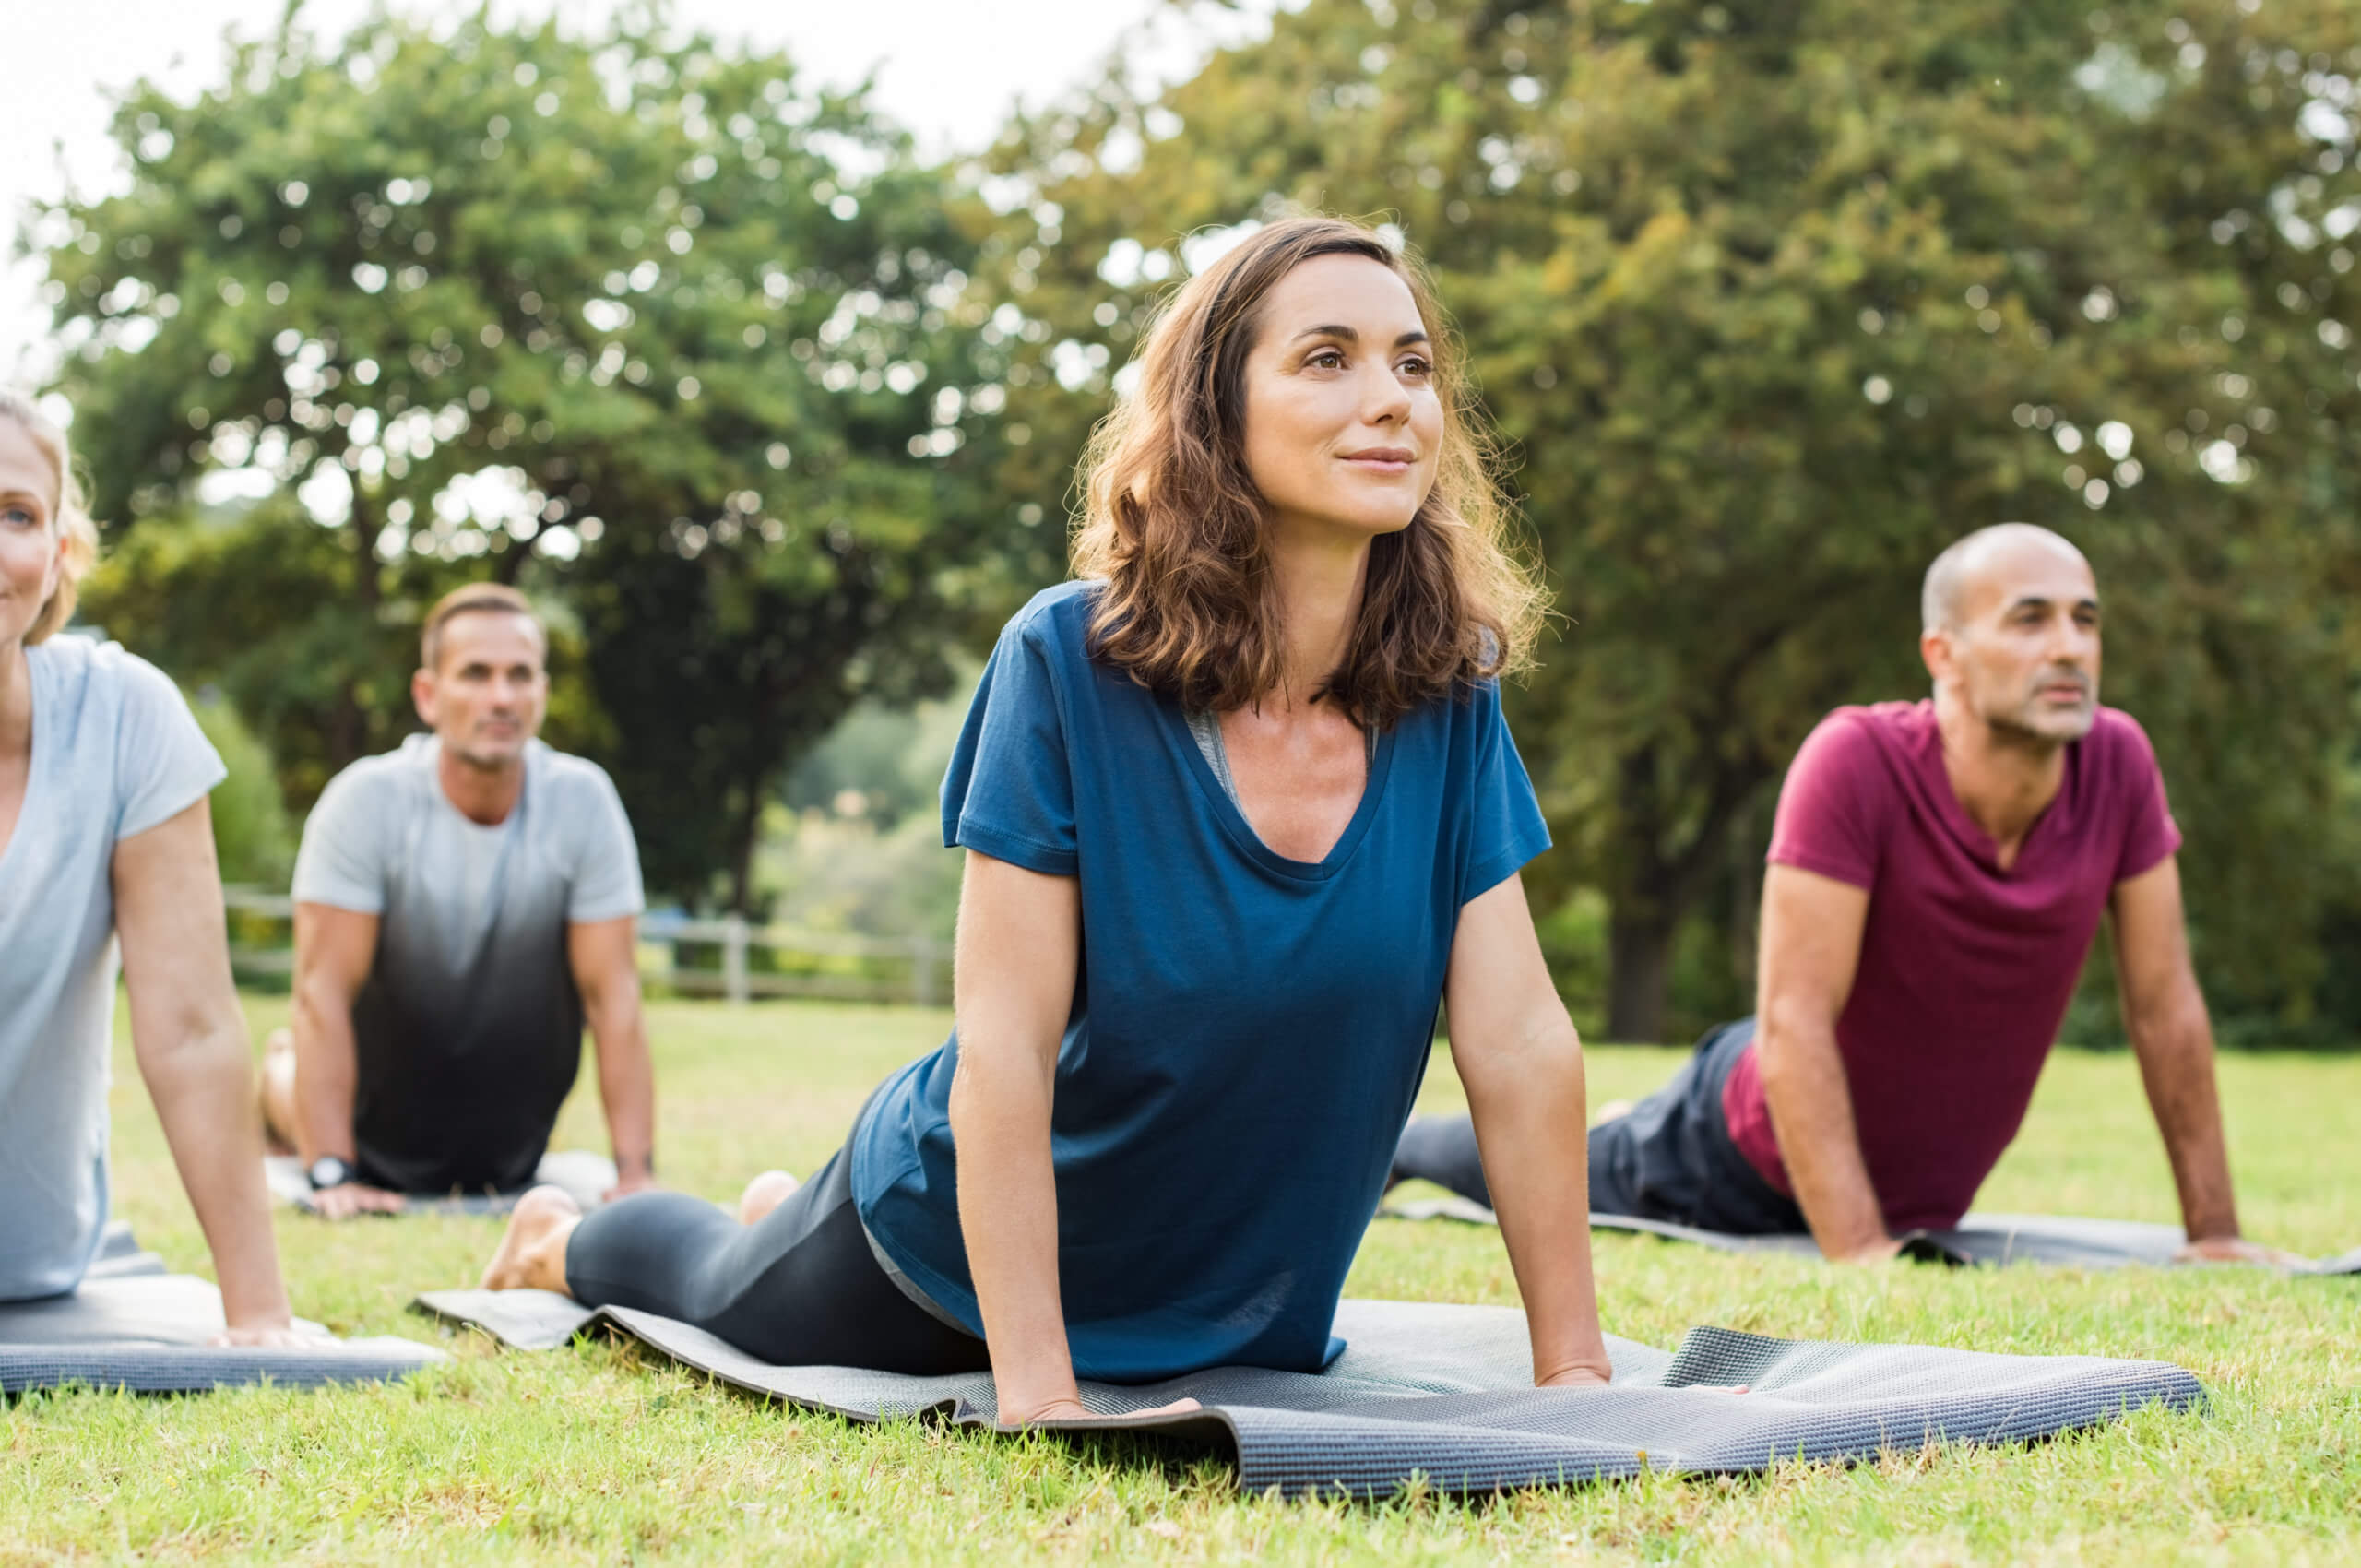  A group of men and women hold a pose while practicing yoga in a park.